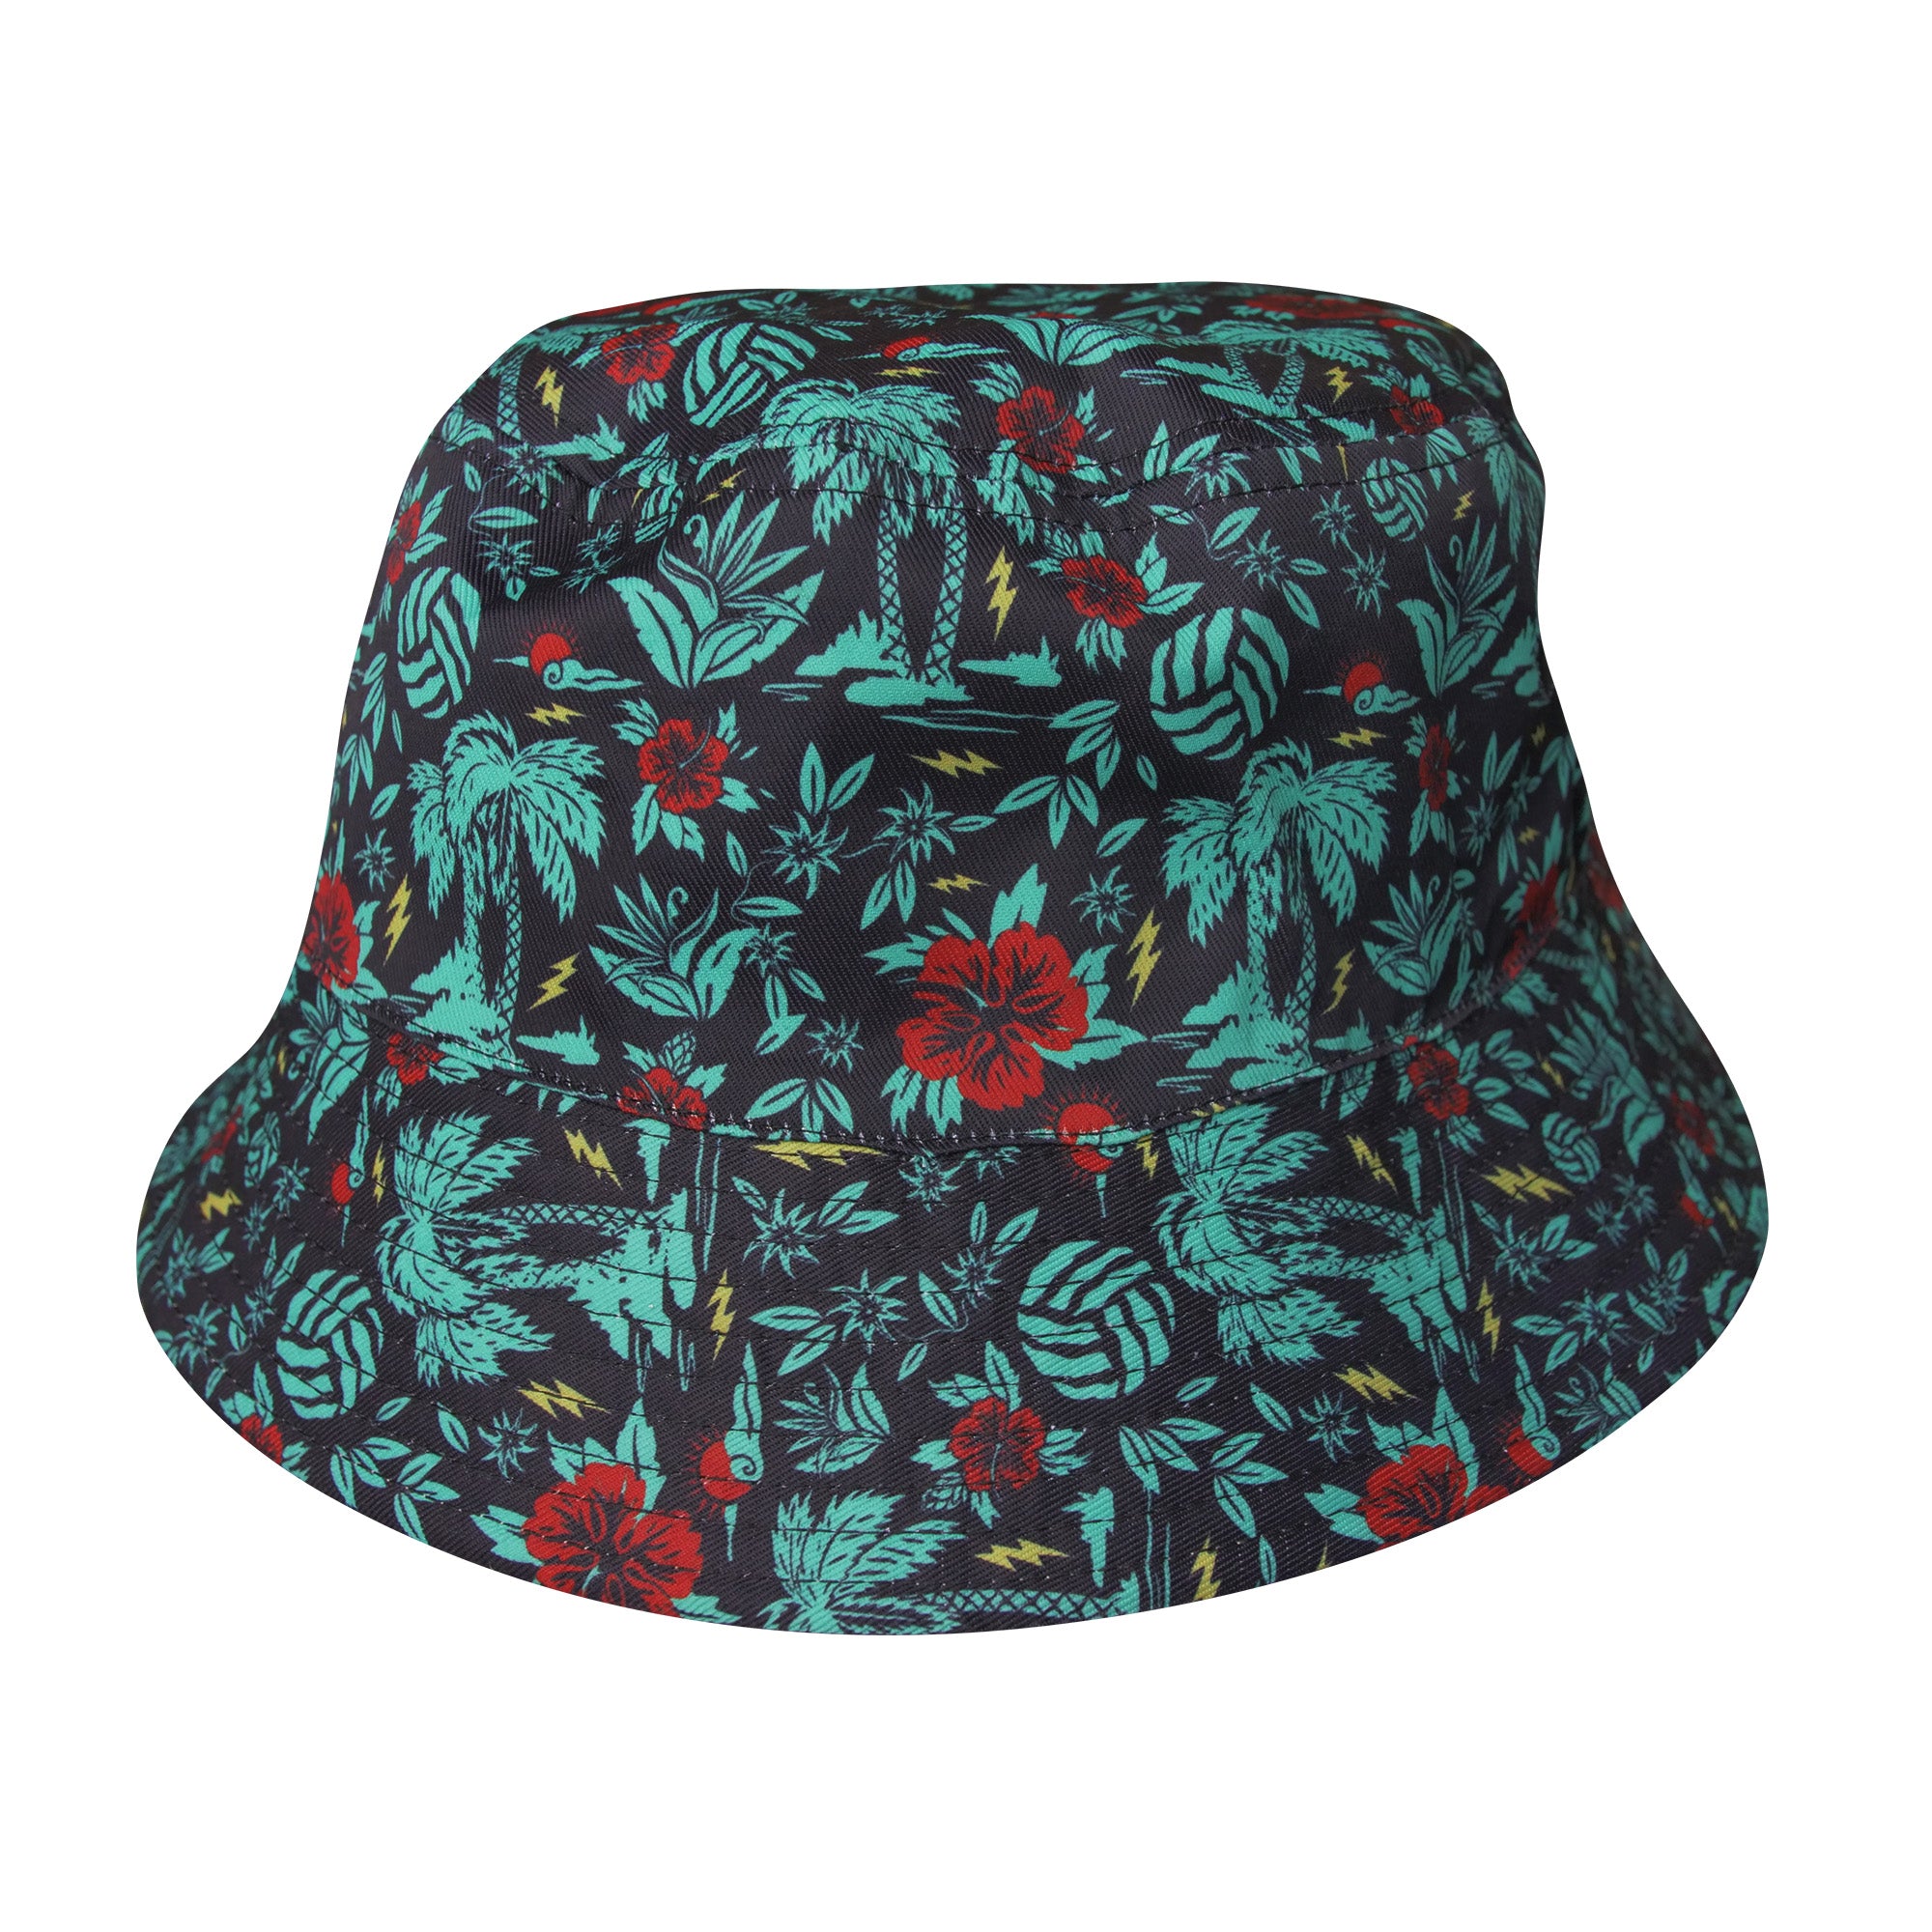 Fire Disco Reversible Bucket hat — STRIPED & SPOTTED